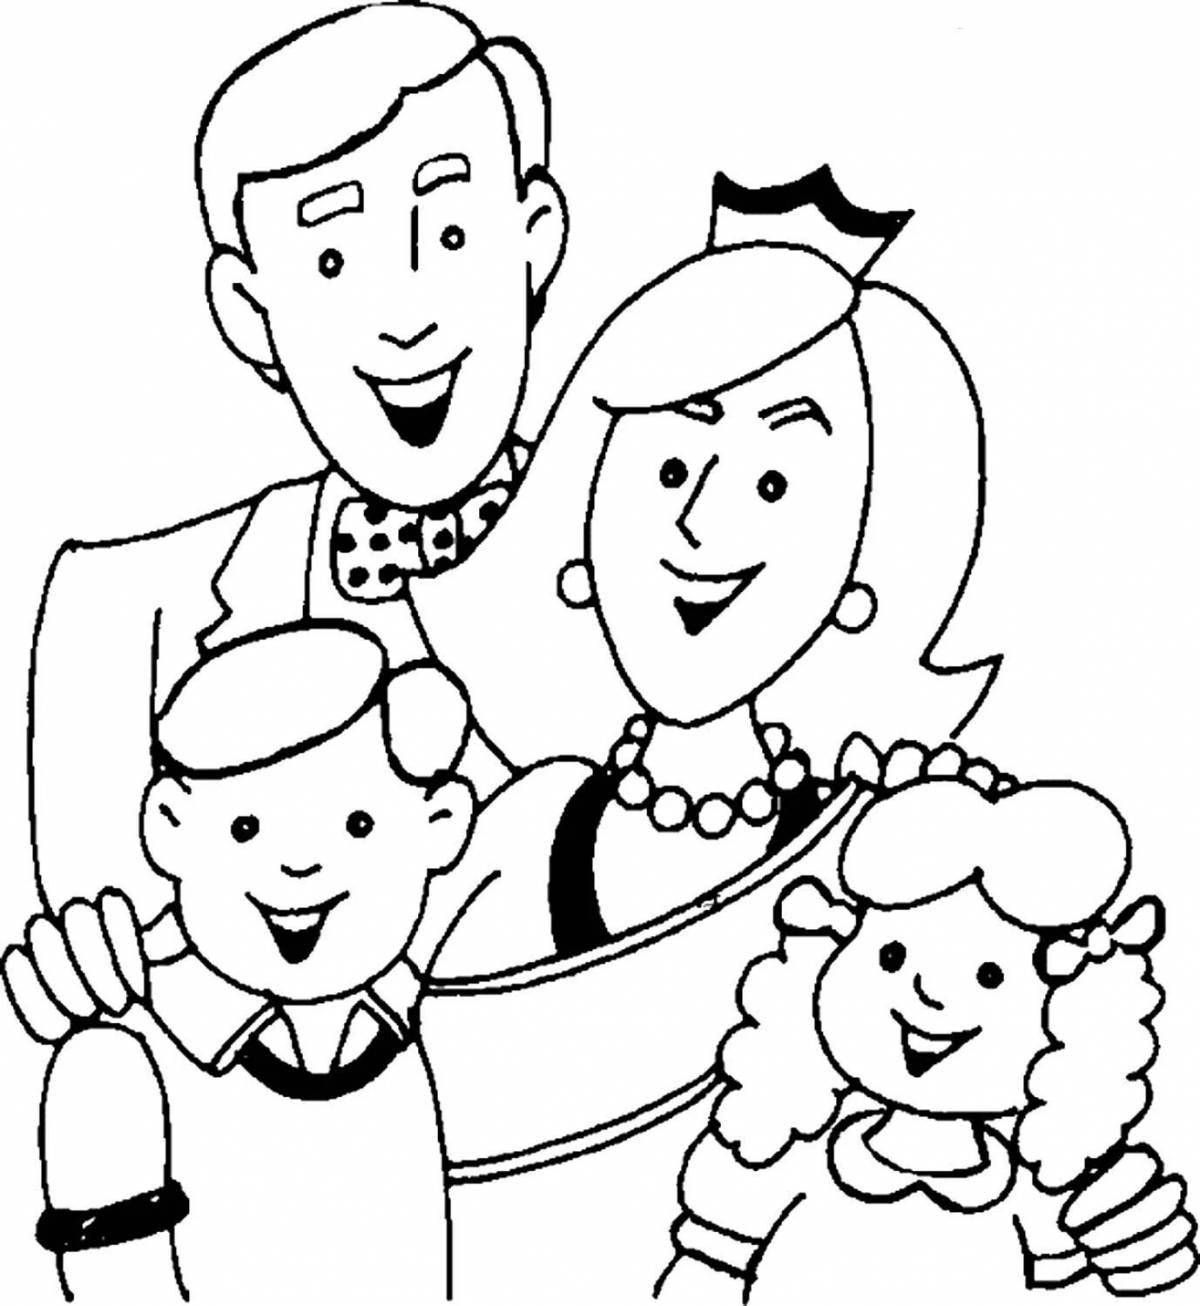 Funny drawing of my family